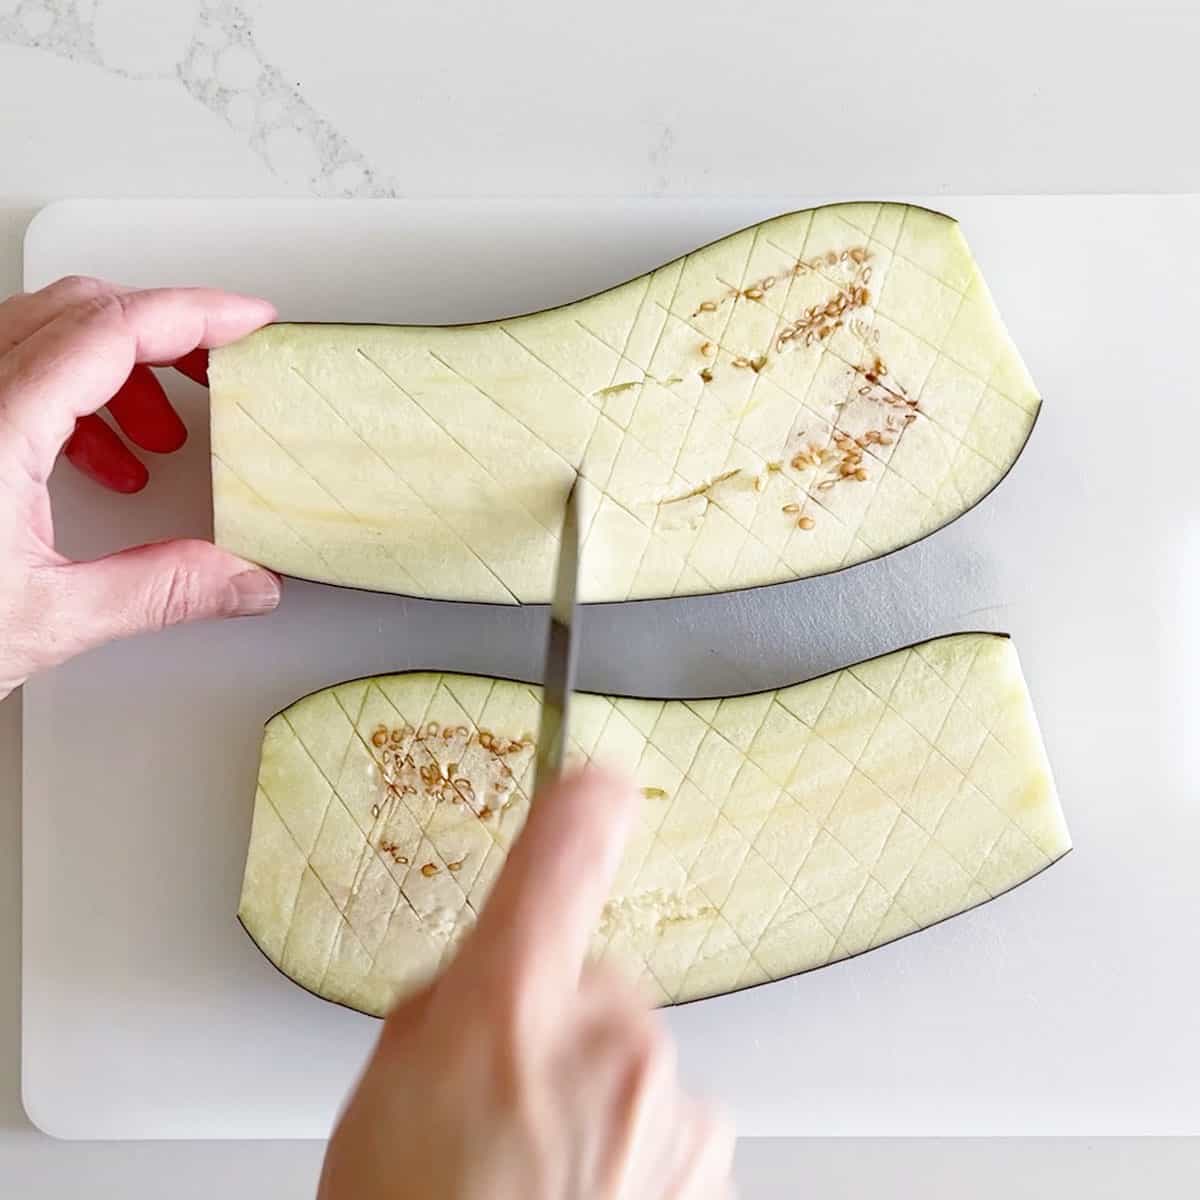 Making shallow cuts in a crosshatch pattern on the flesh side of the eggplant.